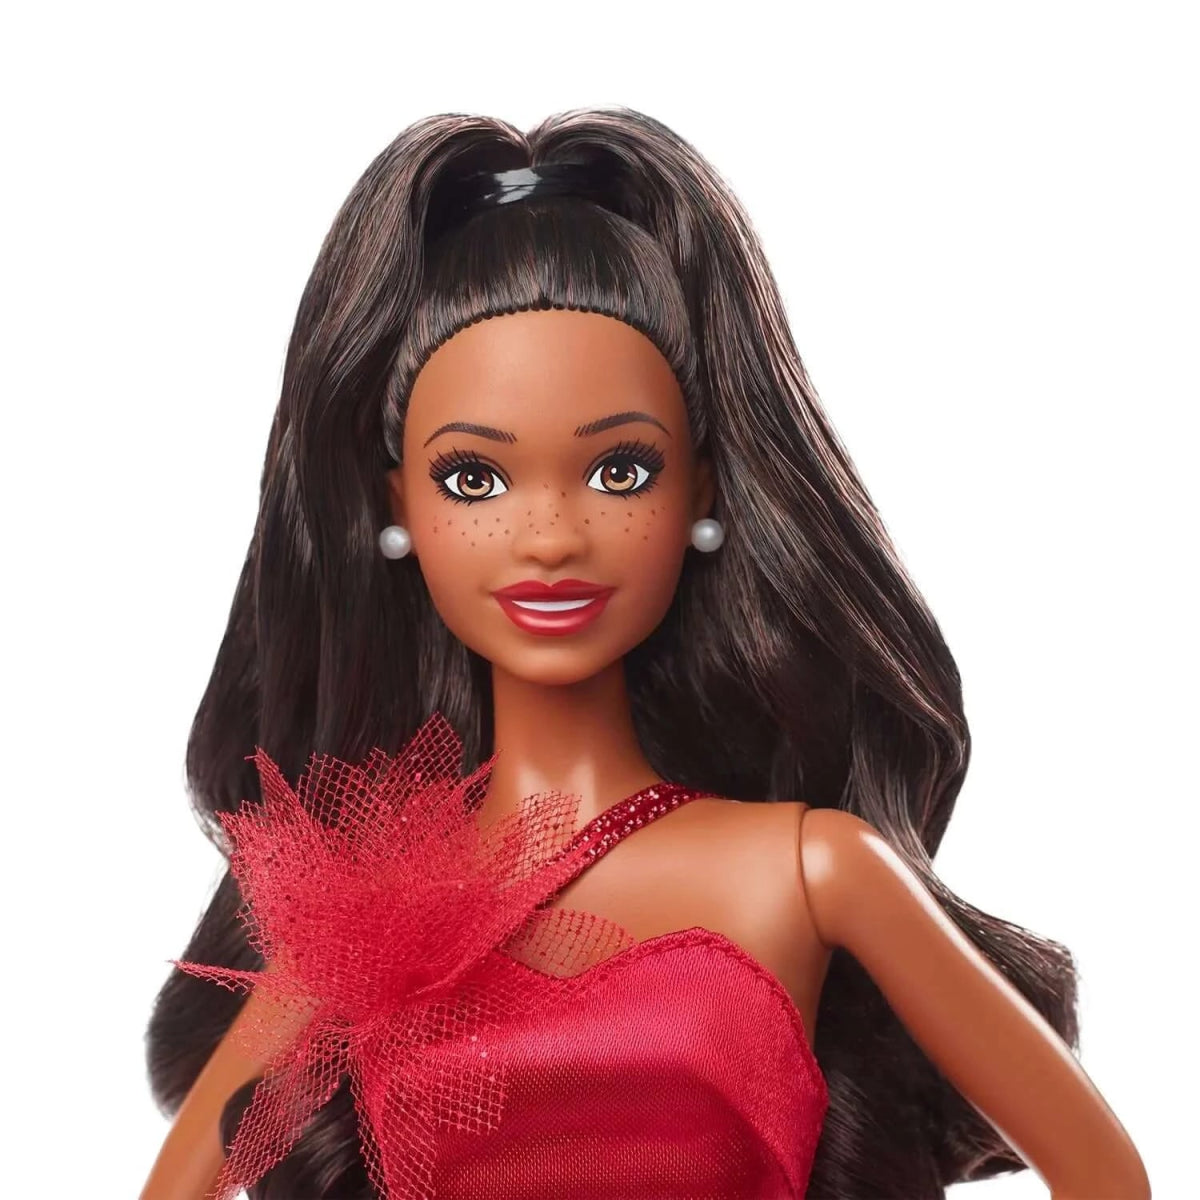 Barbie Holiday Doll 2022 with Wavy Black Updo Hair - Simon's Collectibles